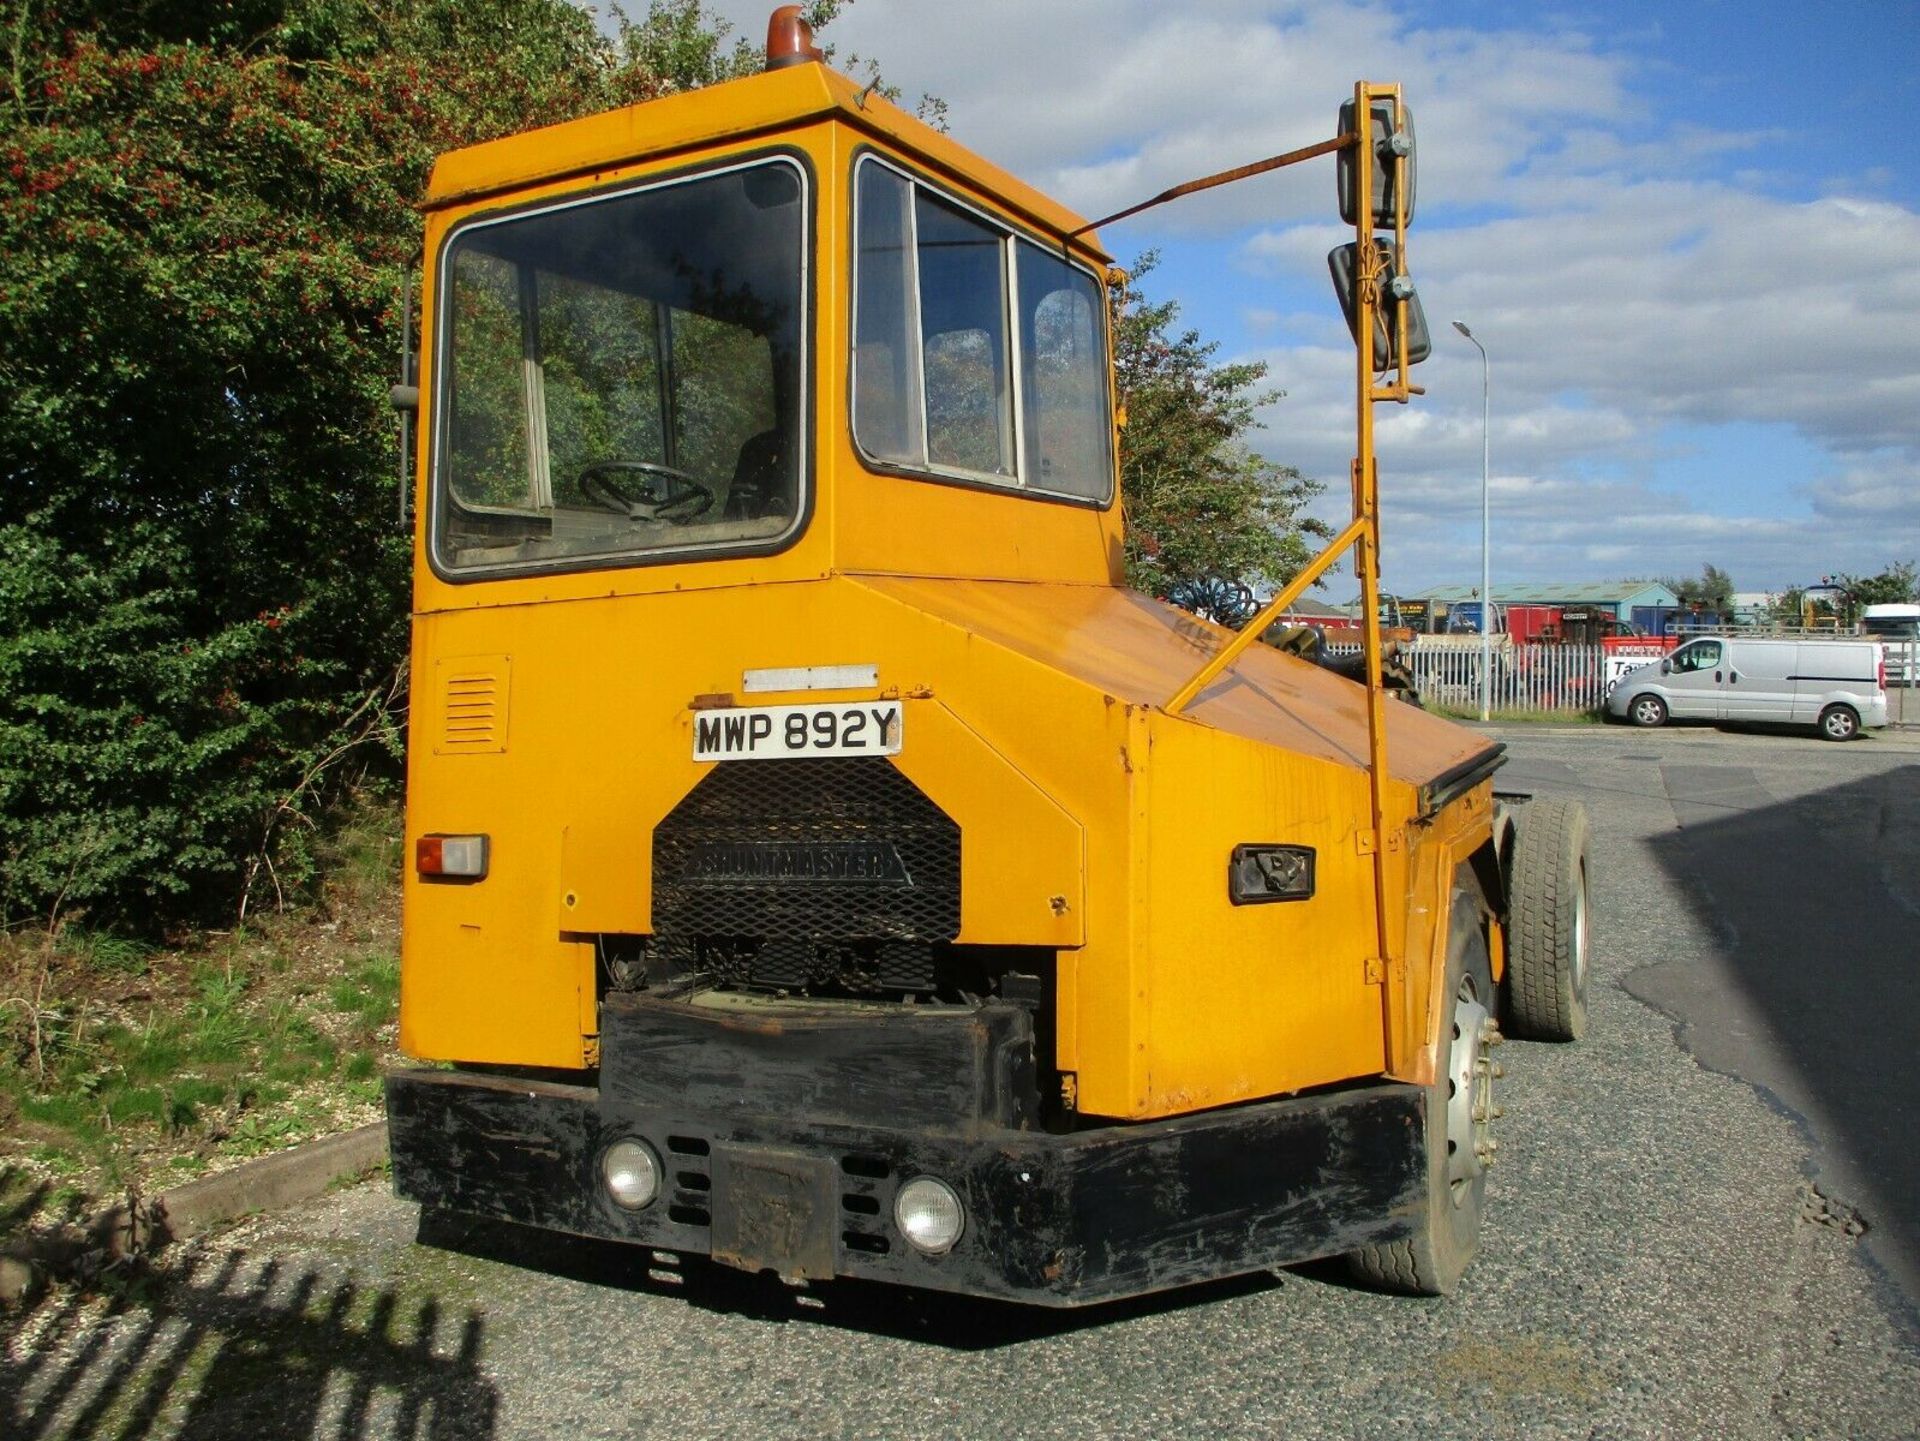 Reliance Dock spotter shunter tow tug tractor unit - Image 9 of 11